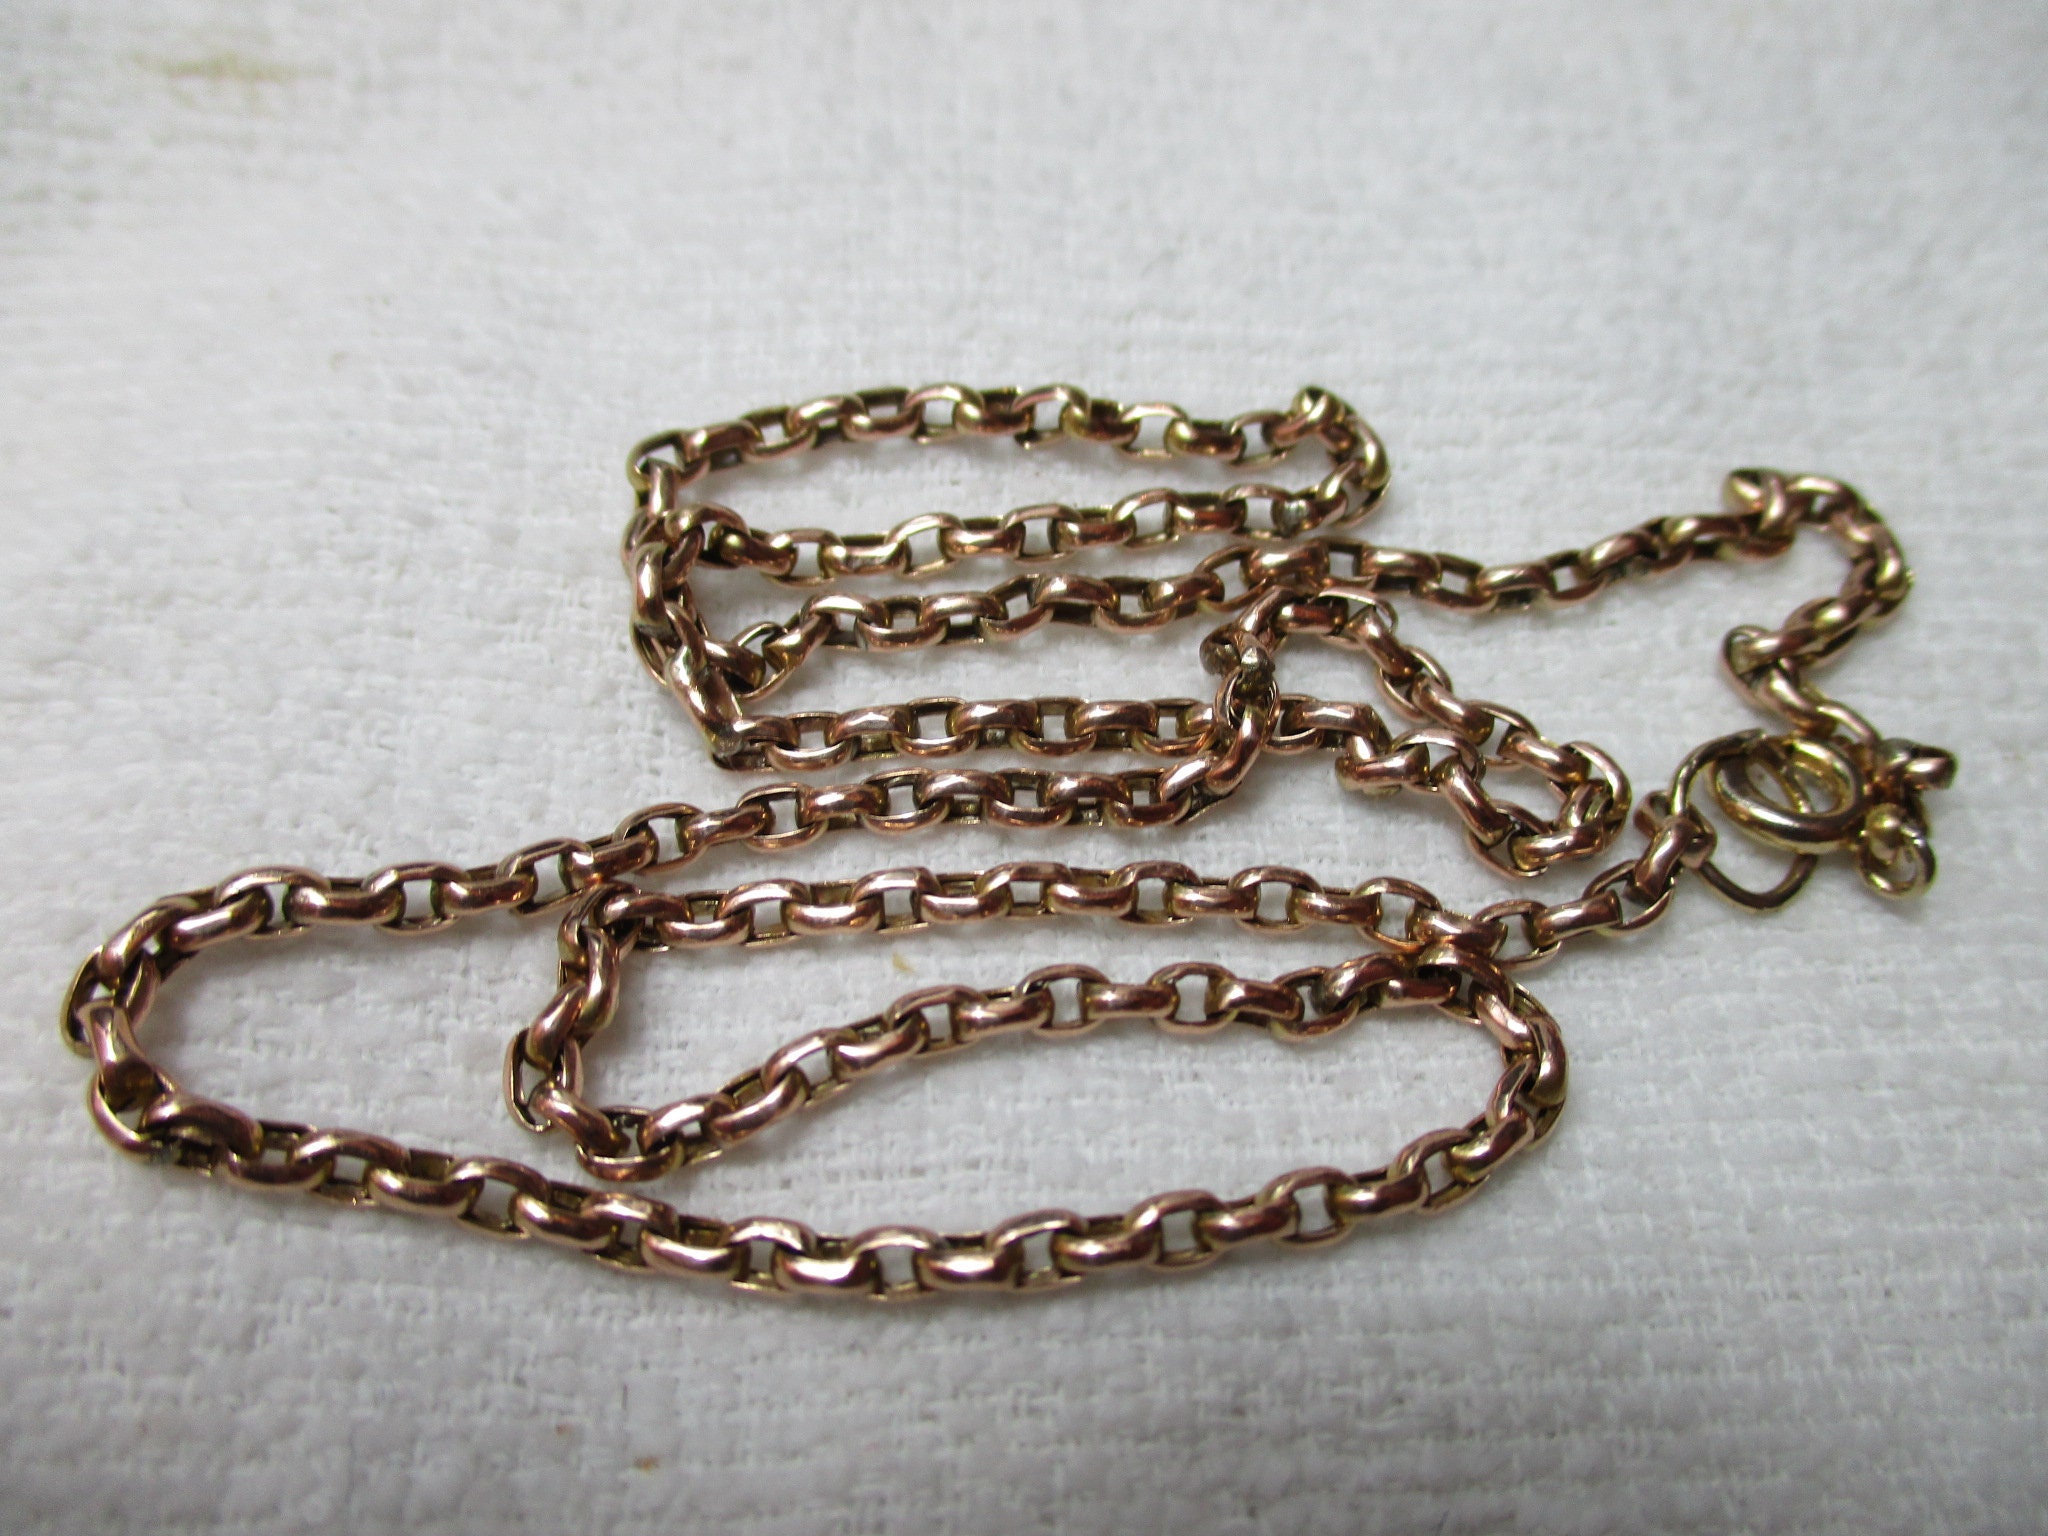 2 Feet Large Chunky Curb Chain Antique Silver Jewelry Chain Craft Chain  Extra Large Curb Chain Link Chain Antique Gold or Silver 